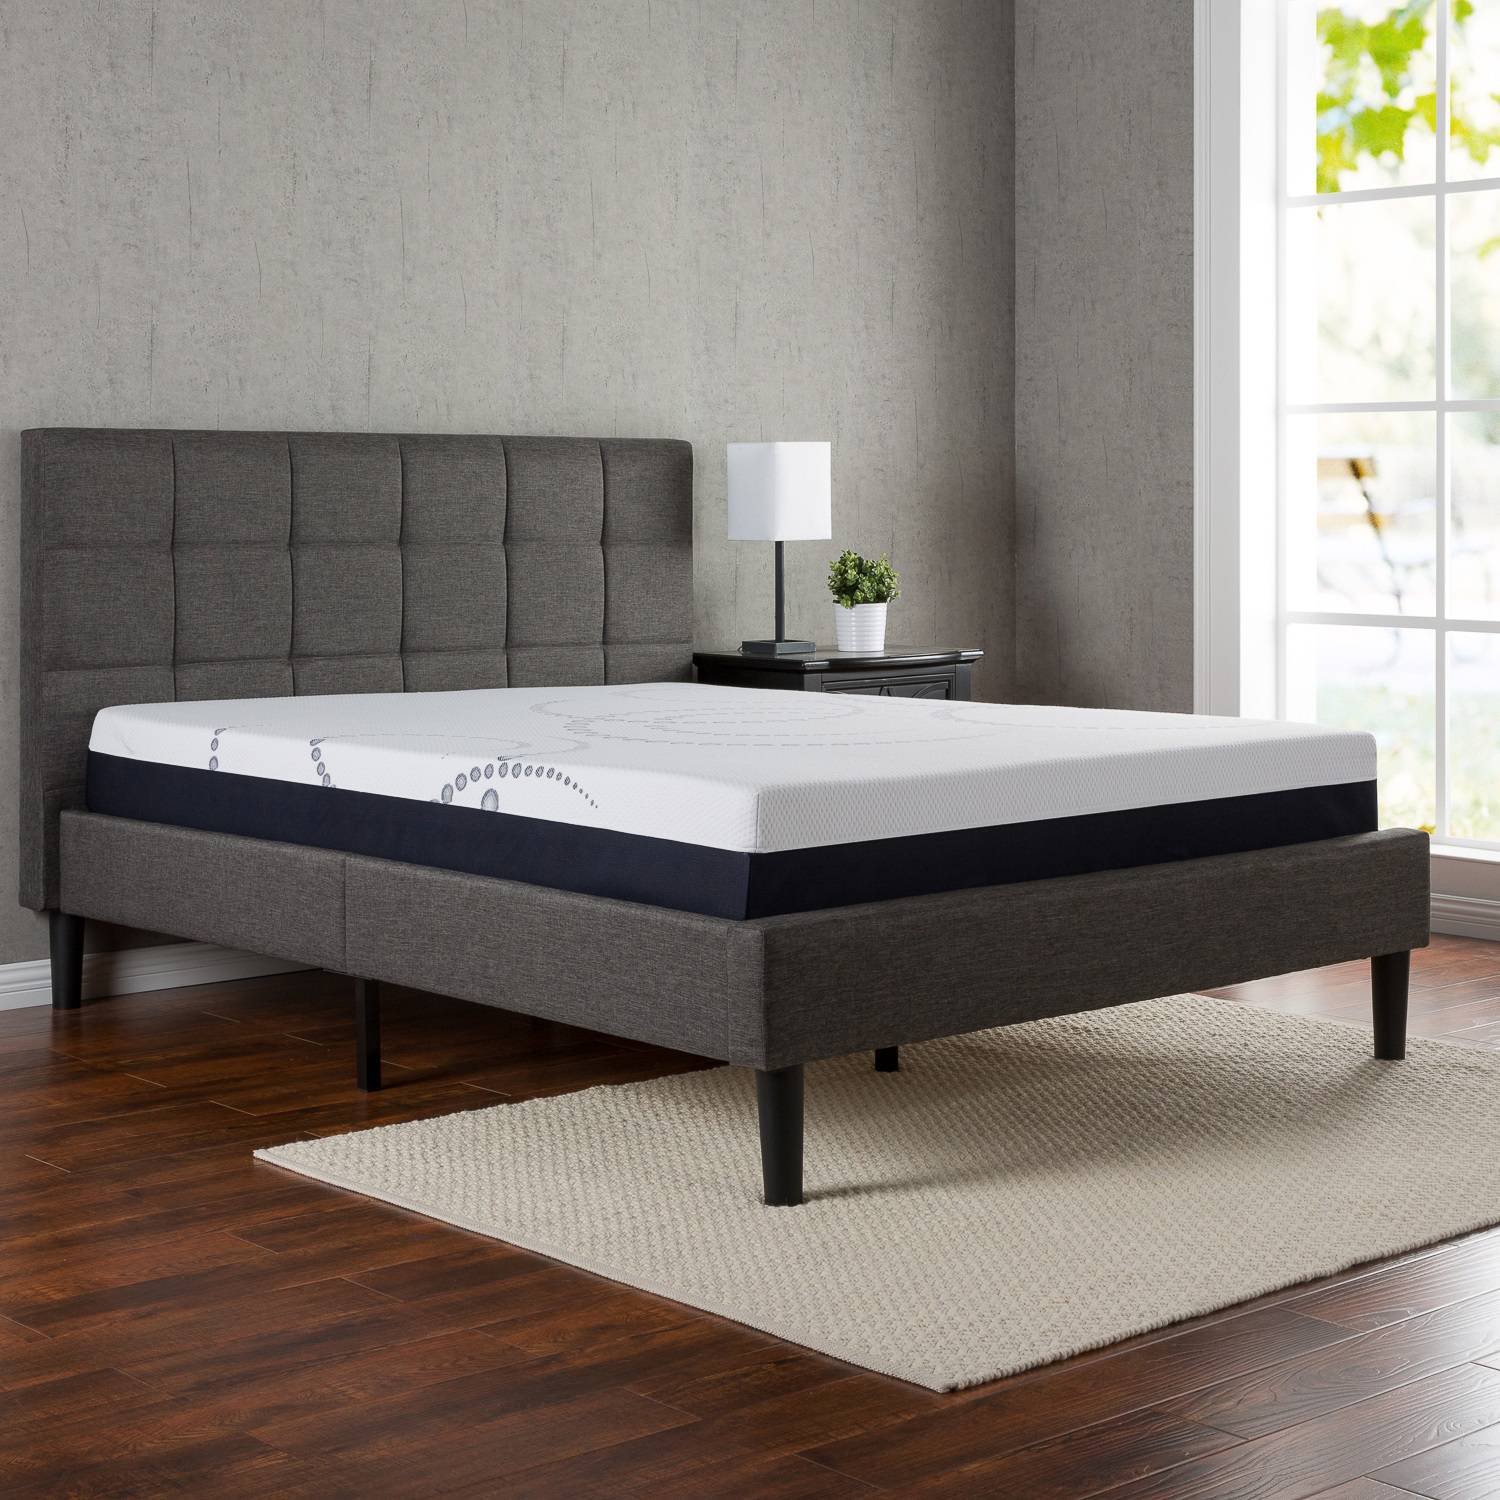 full size platform bed frame with headboard zinus upholstered square stitched platform bed with headboard and wooden VBTZJKZ